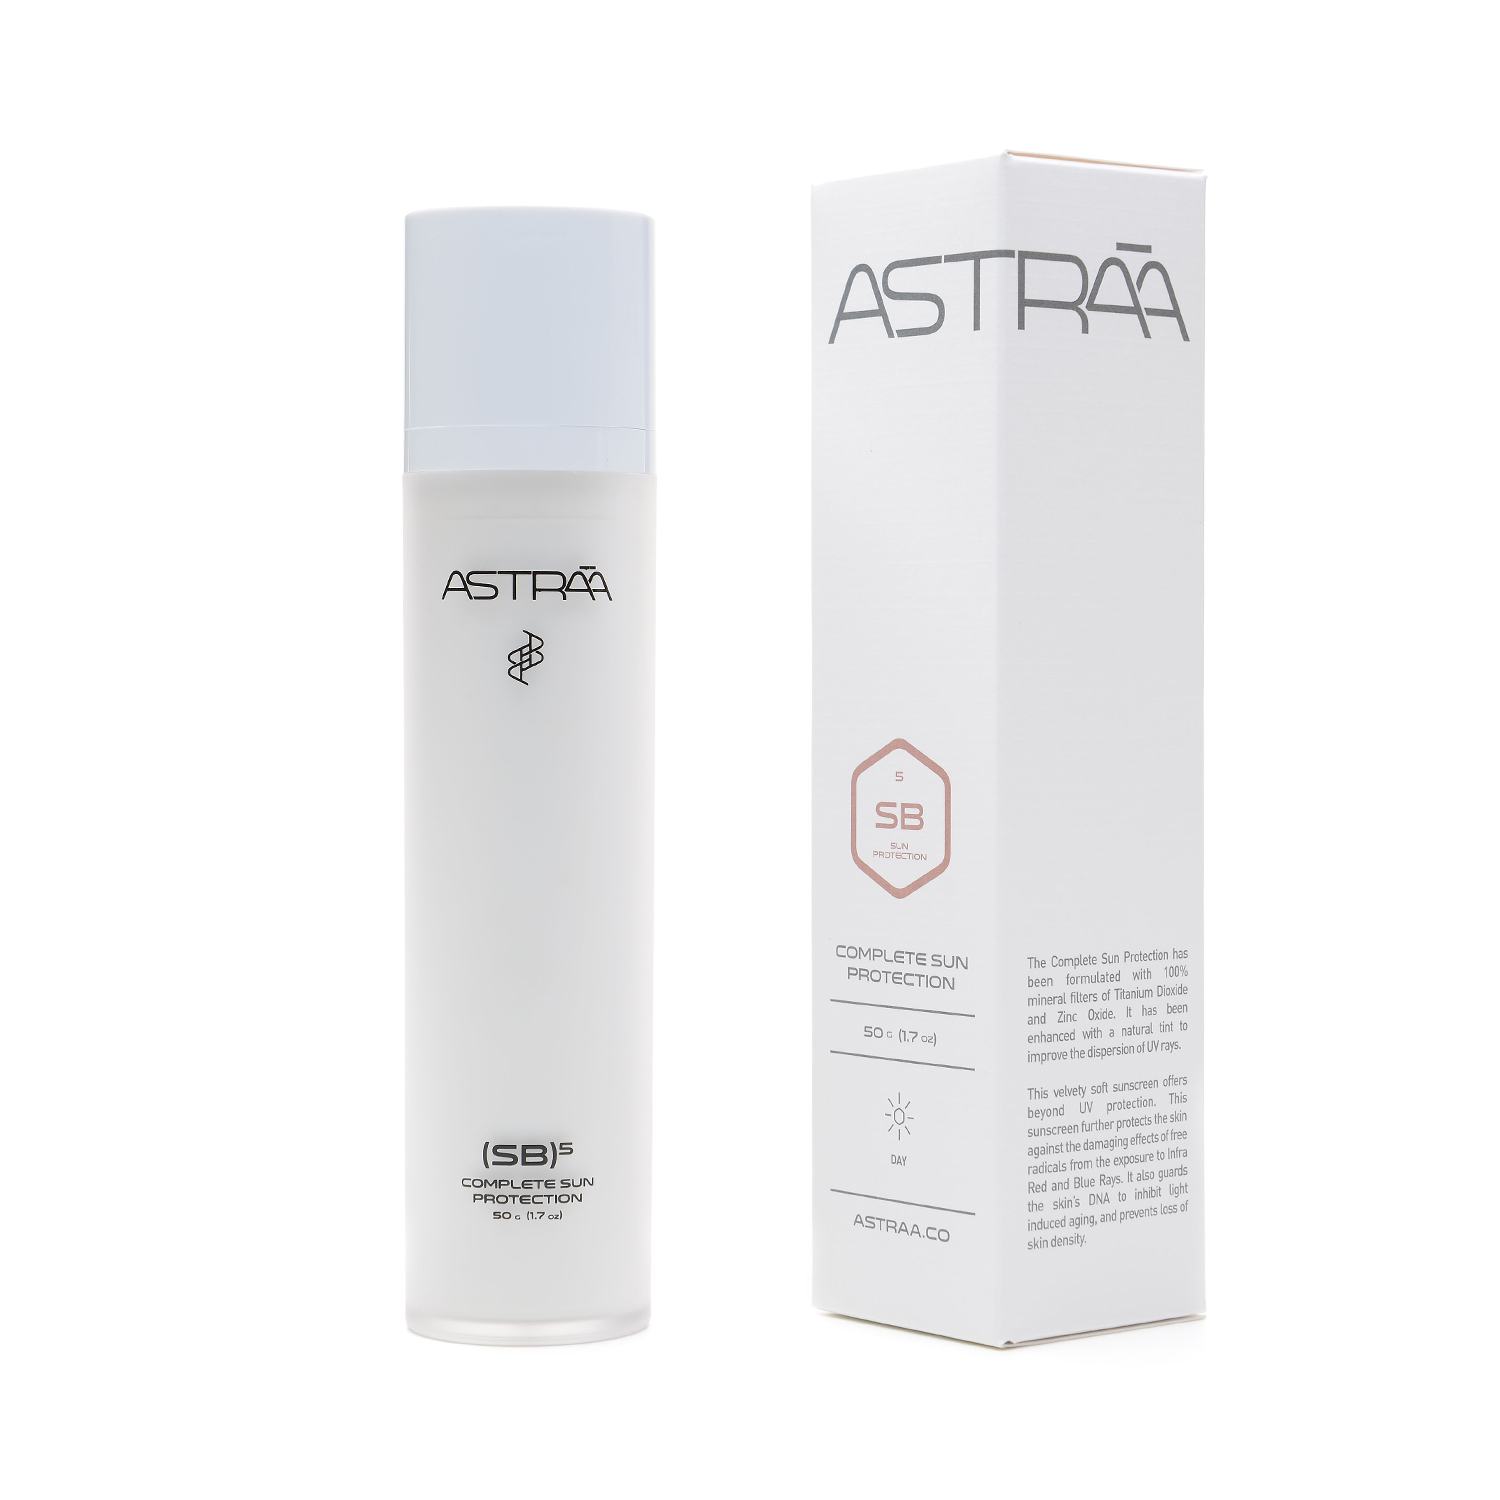 ASTRAA Complete Sun Protection